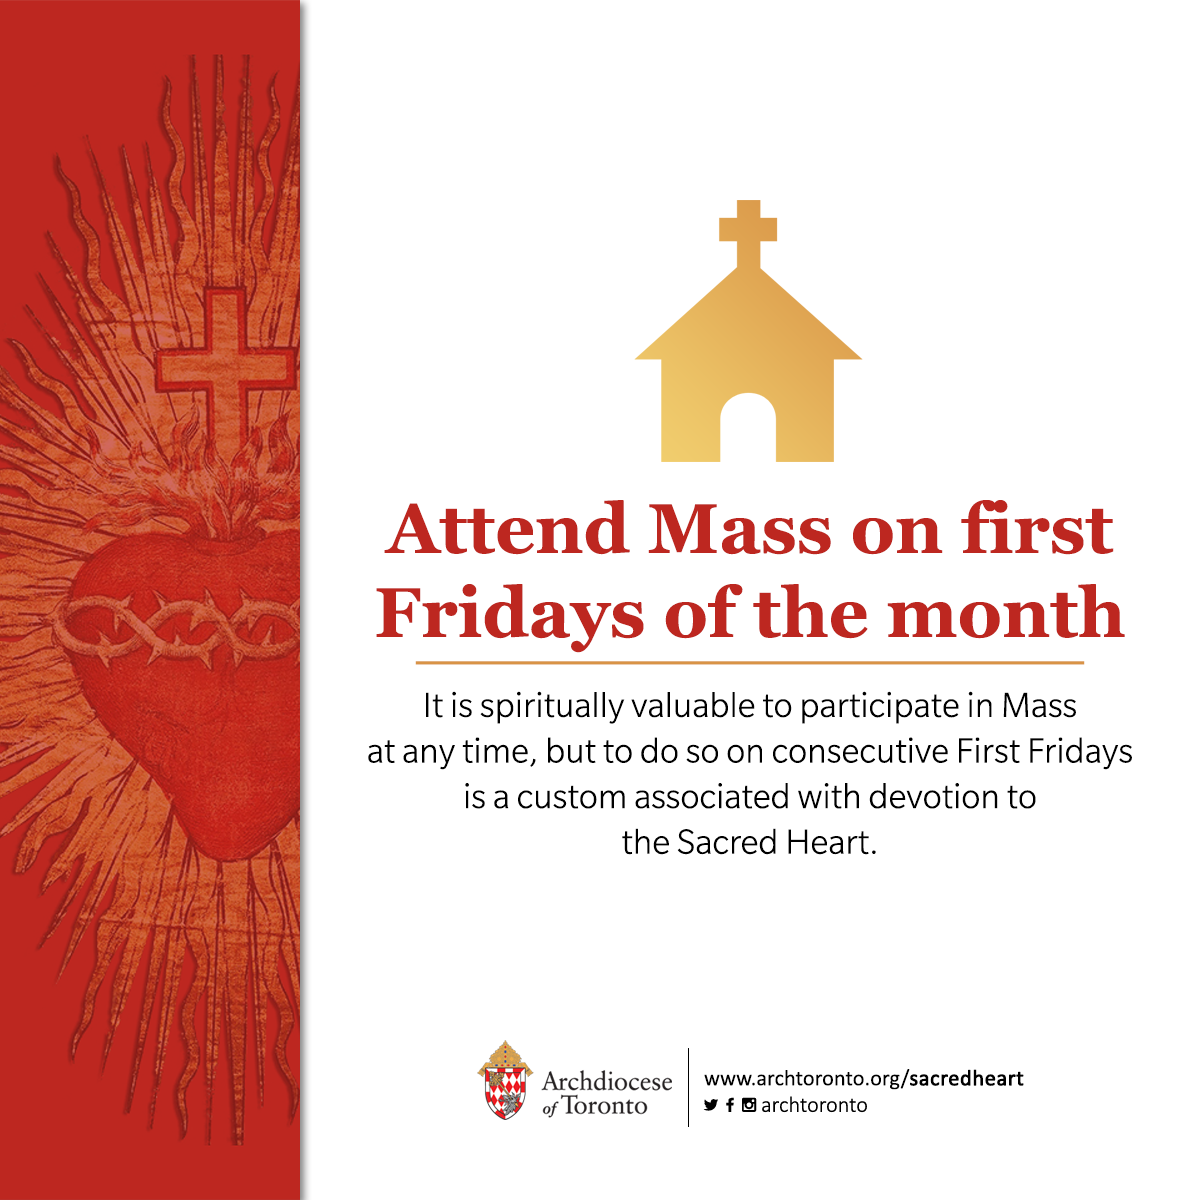 Attend Mass on first Fridays of the month